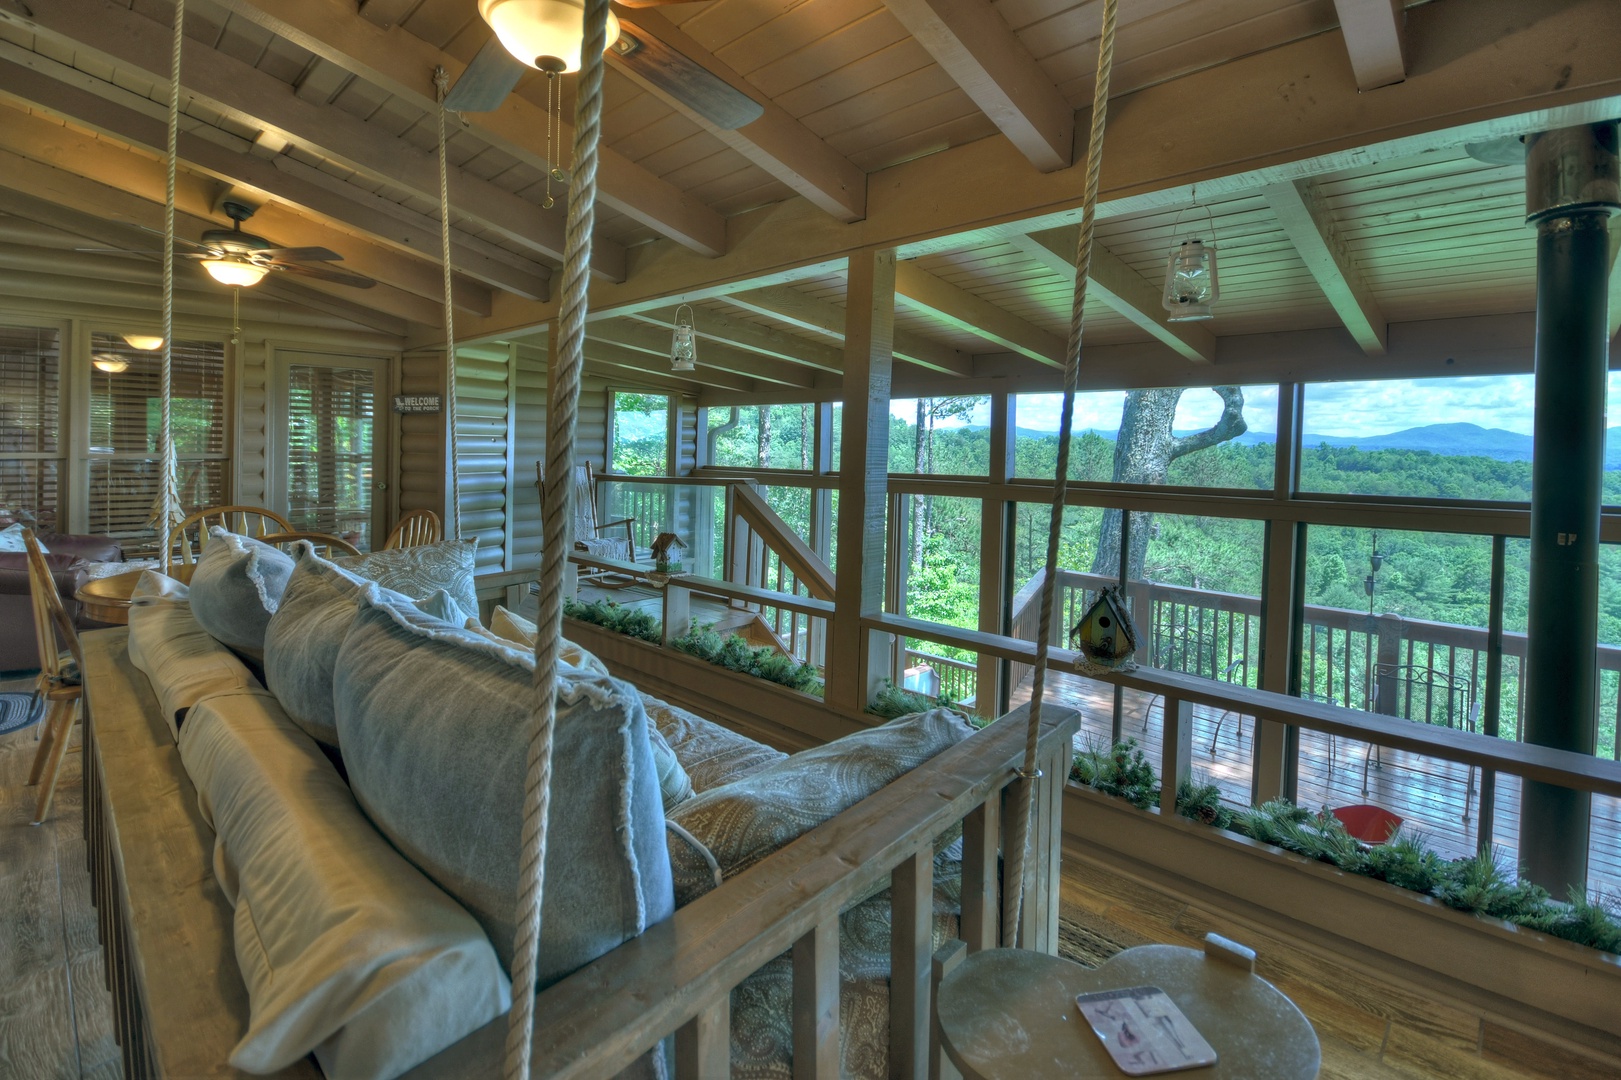 Heavens Step - Sunroom Swing with a View